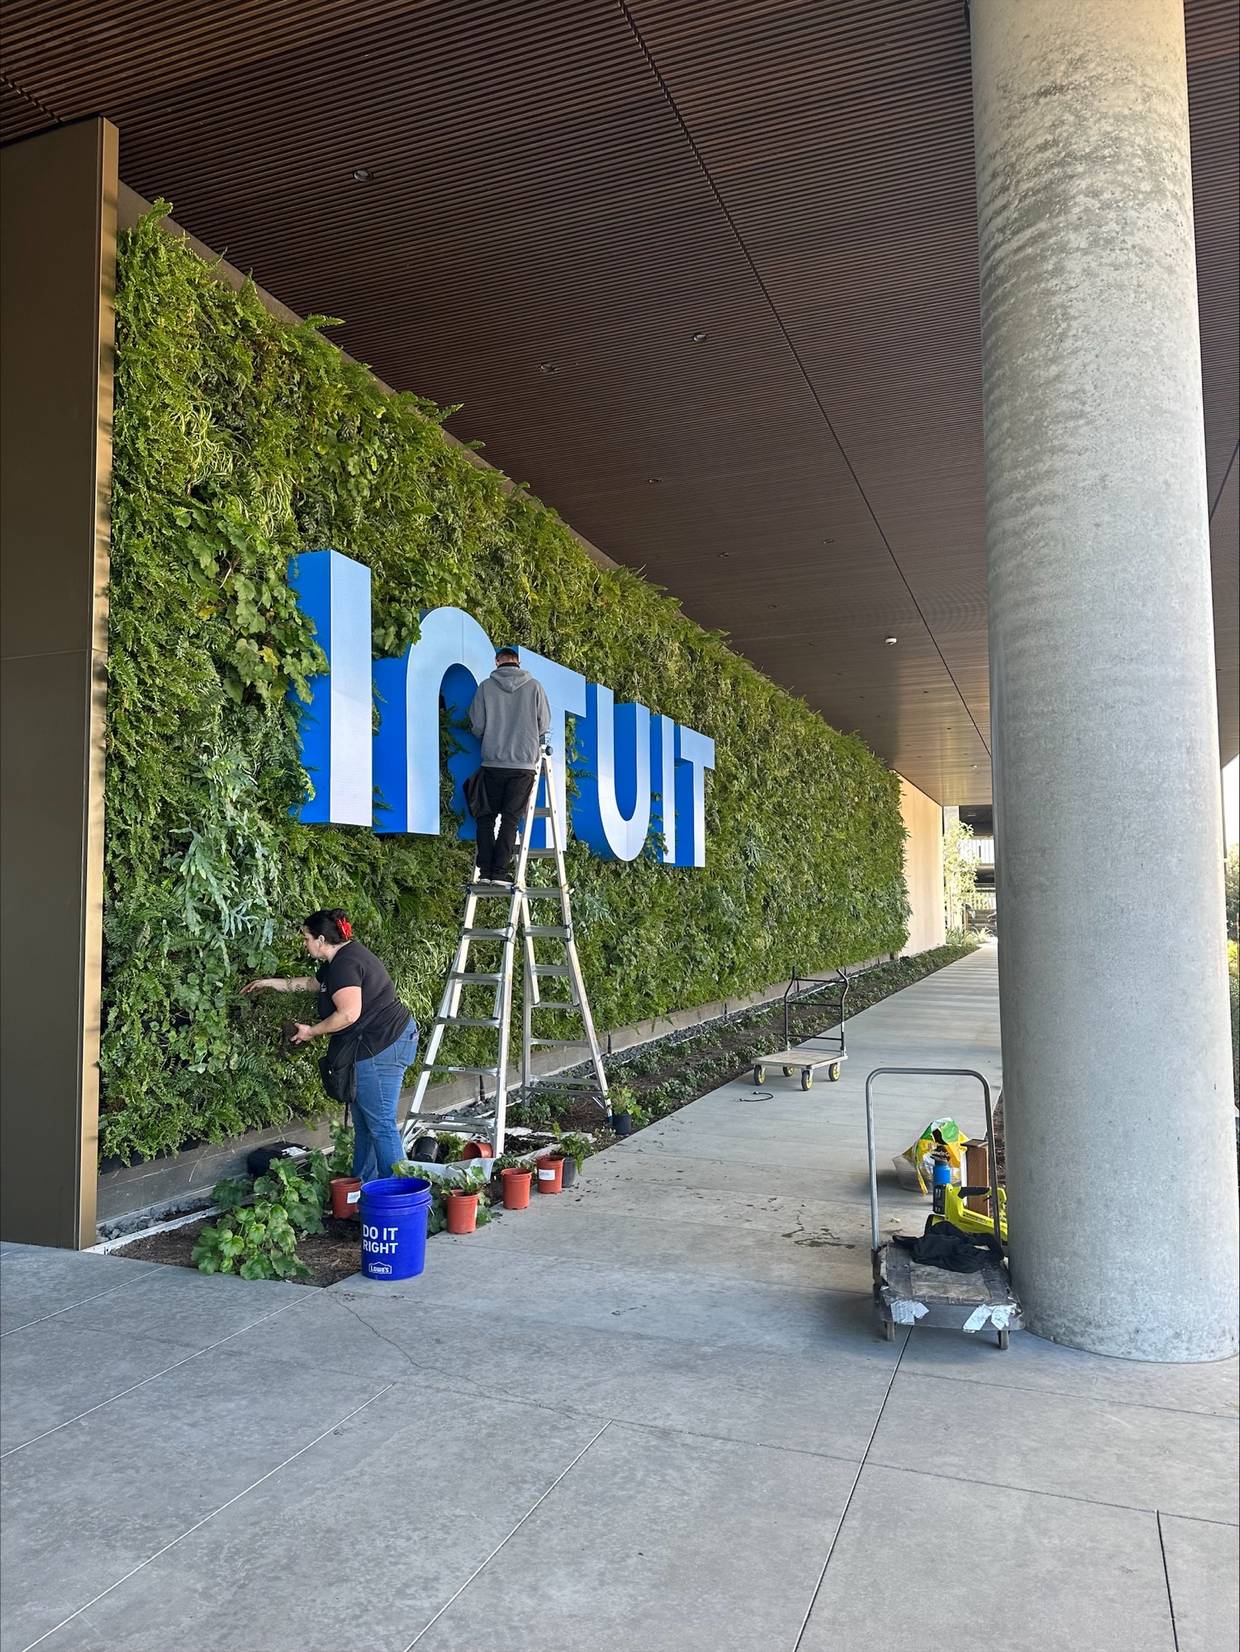 A group of employees tends to a large wall filled with greenery that says Intuit